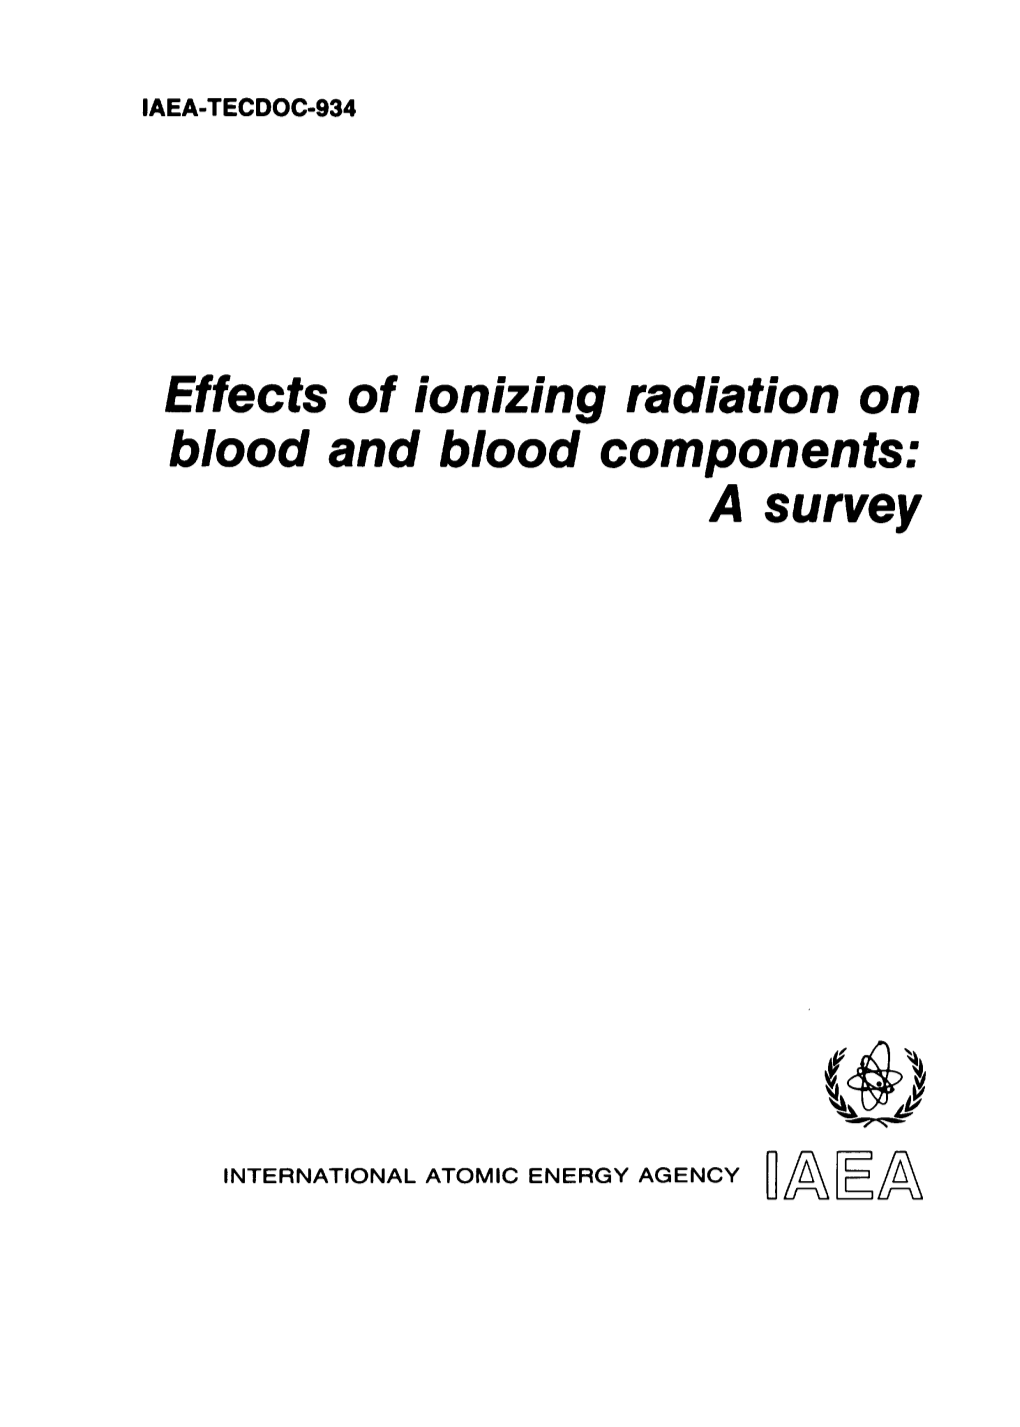 Effects of Ionizing Radiation on Blood and Blood Components: a Survey